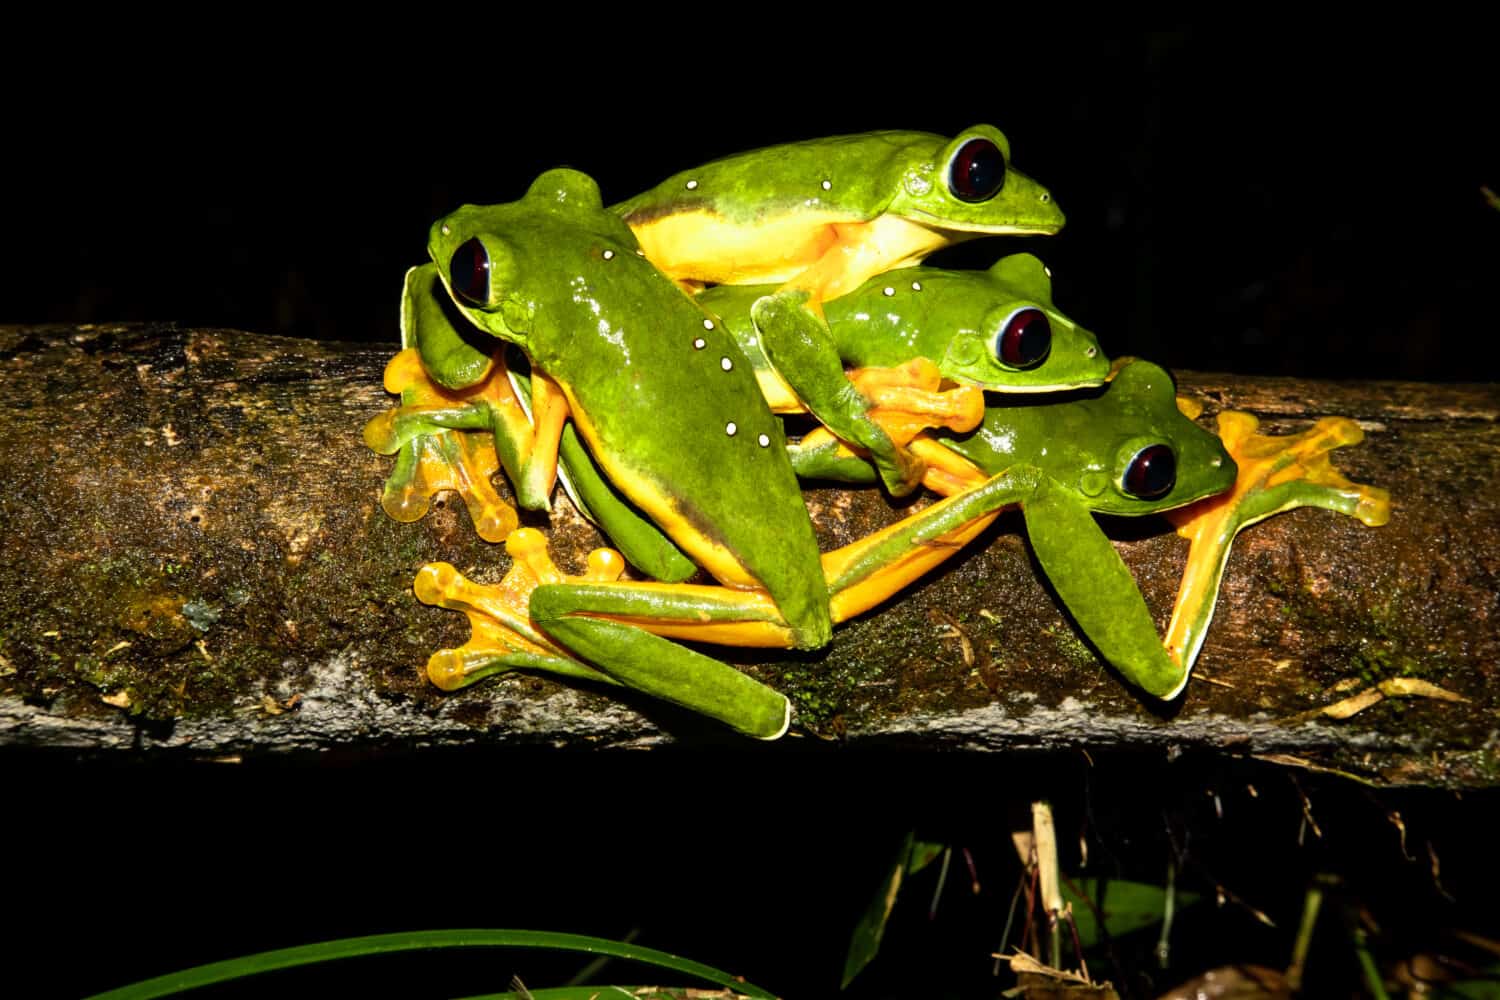 gliding tree frogs (Agalychnis spurrelli) or gliding leaf frog or spurrell's leaf frog. Four male frogs fighting on a branch. Photo taken at Corcovado national park, Osa Peninsula, Costa Rica.